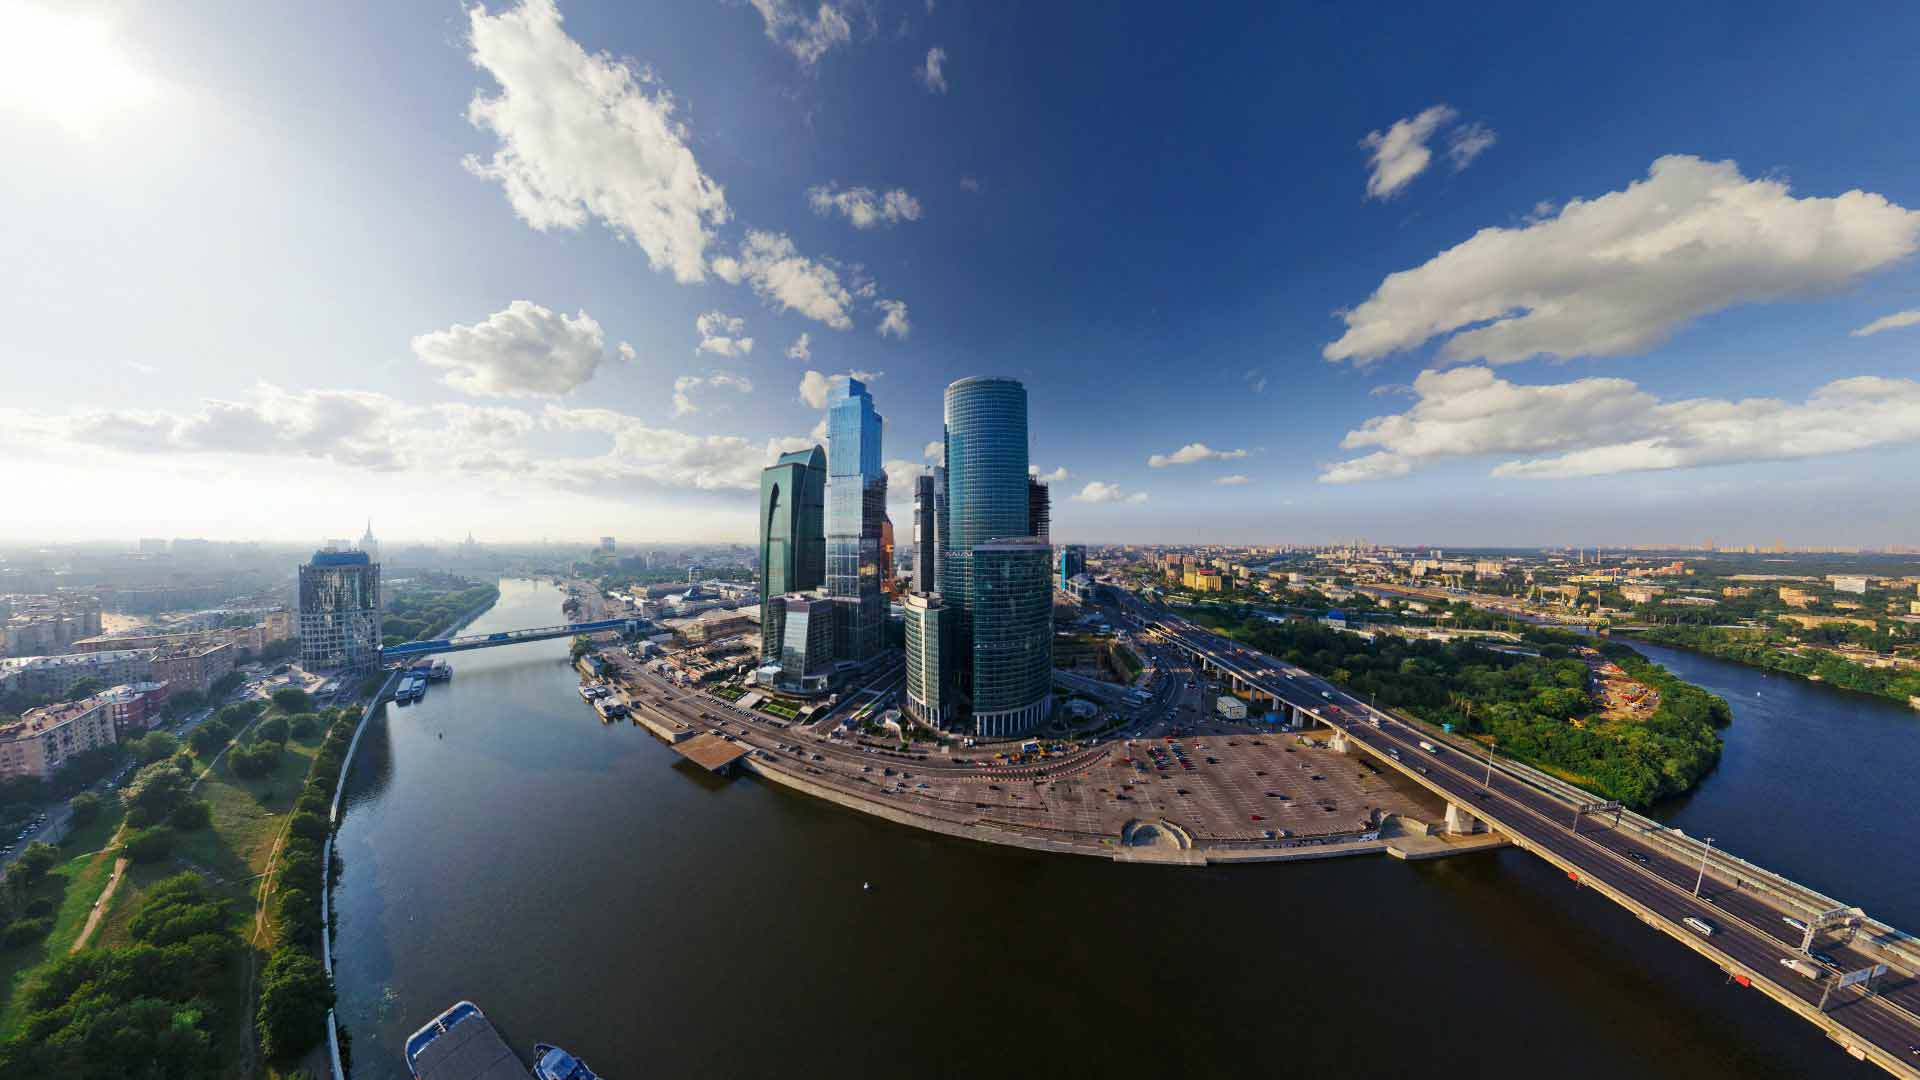 Amazing view of moscow wallpapers and images - wallpapers ...